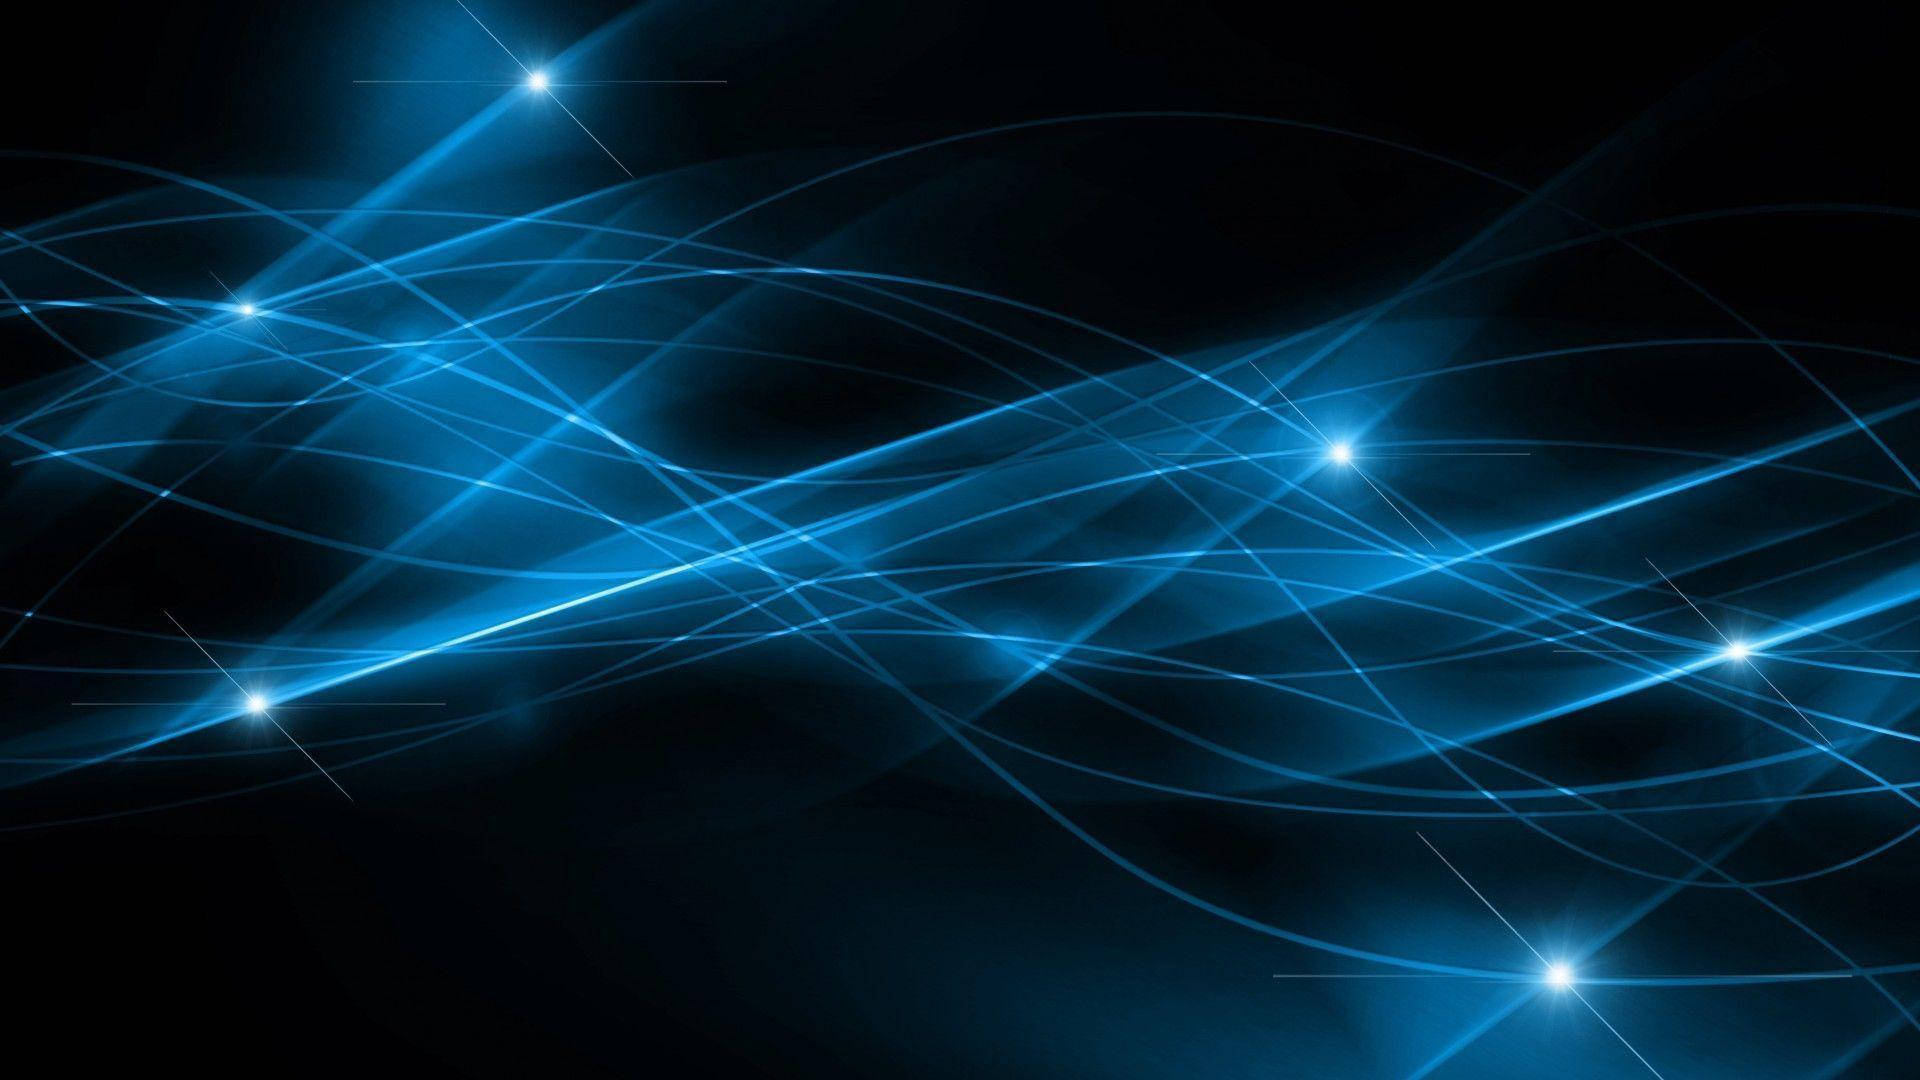 Digital Curves With Black And Blue Background Wallpaper